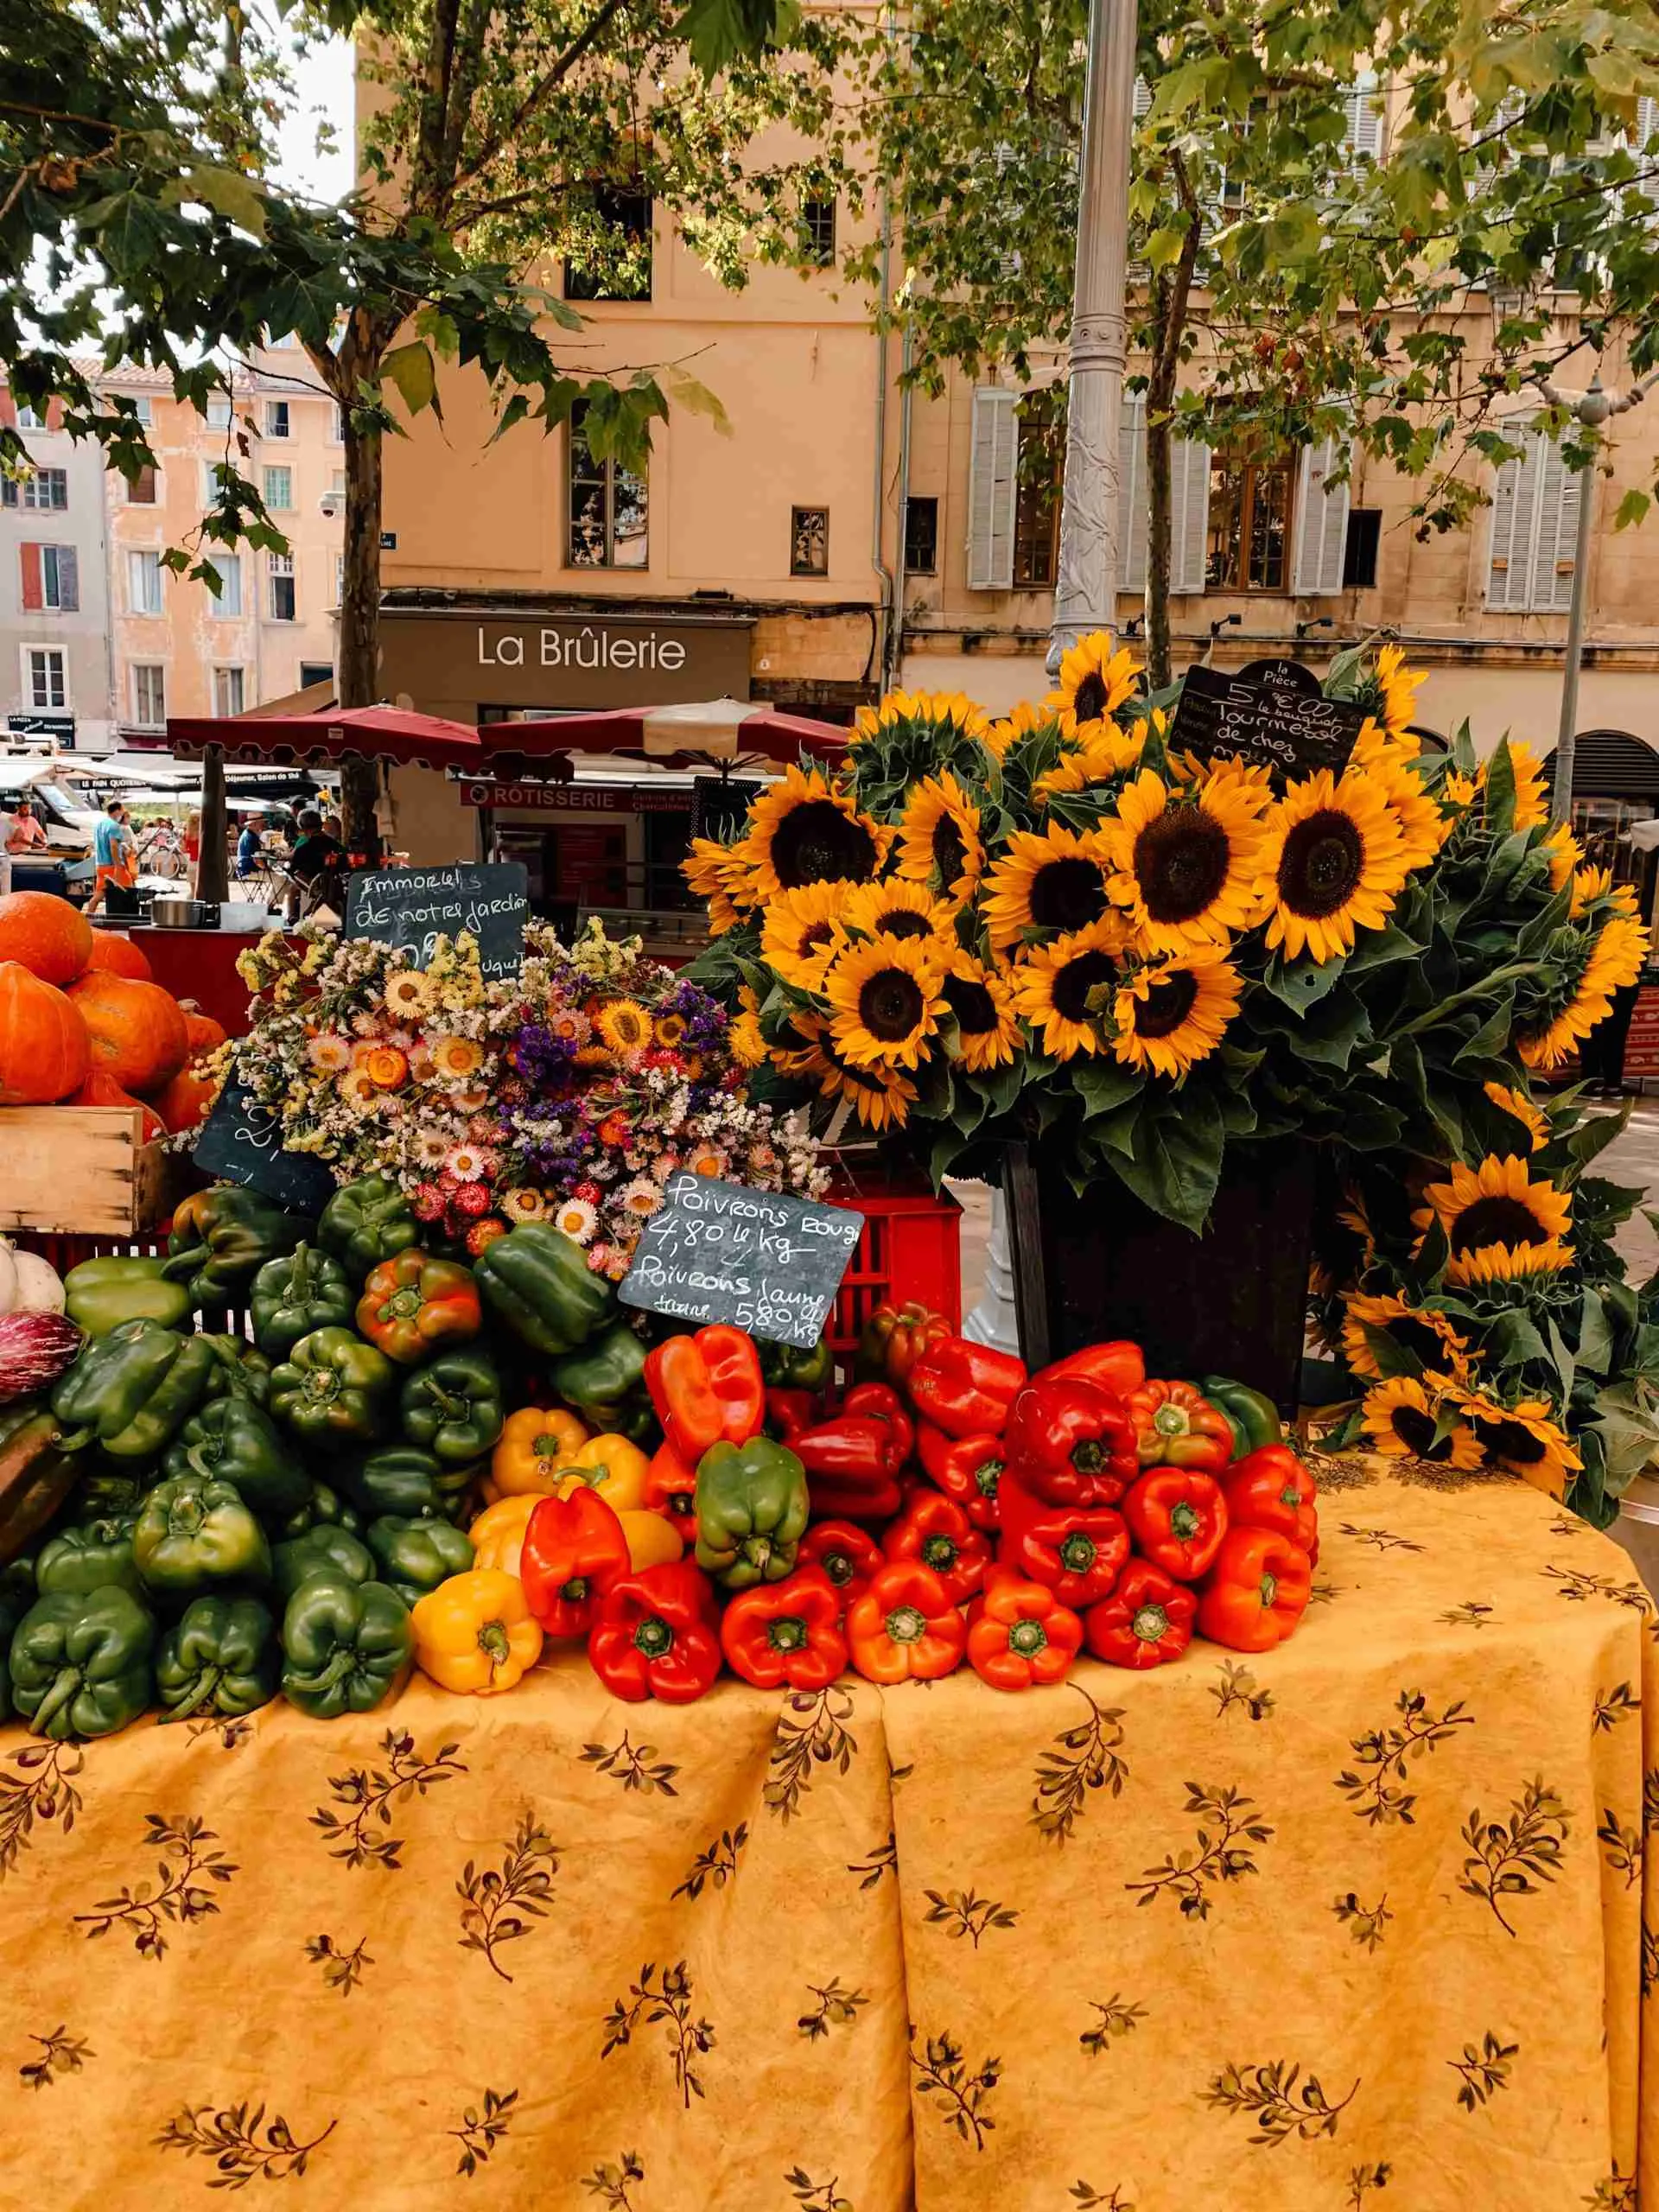 A table full of peppers, flowers and other local product sits on a bright yellow table cloth in the middle of a square in Provence 